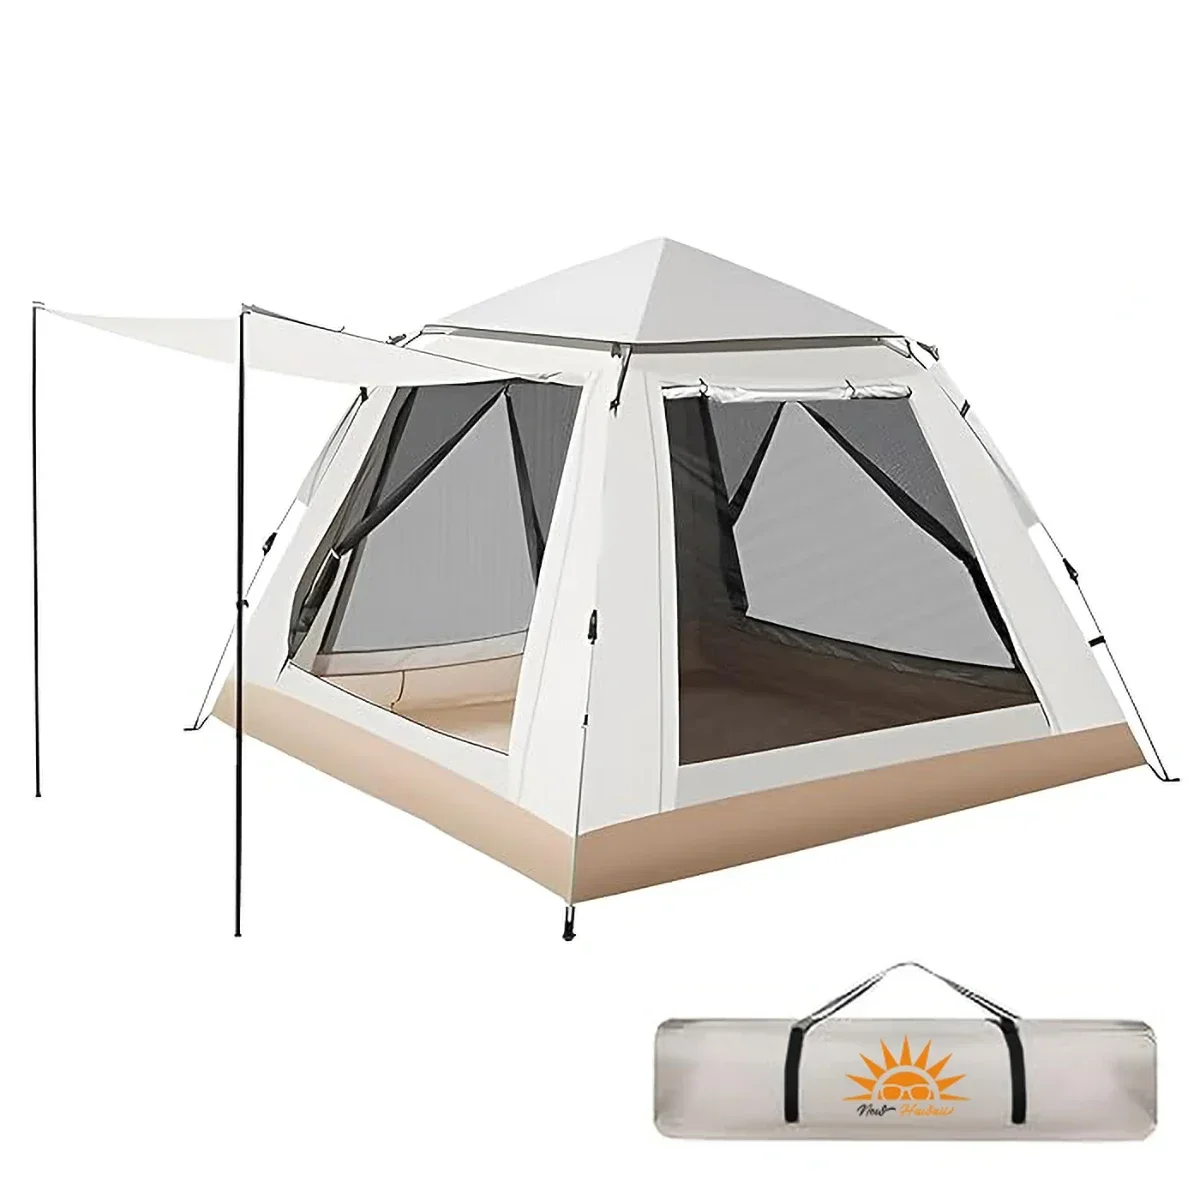 

One Touch Automatic Tent Camping Tents 4 Person Beach Portable Camp Lightweight Shelter Family Docking Beach Cabana Outdoor